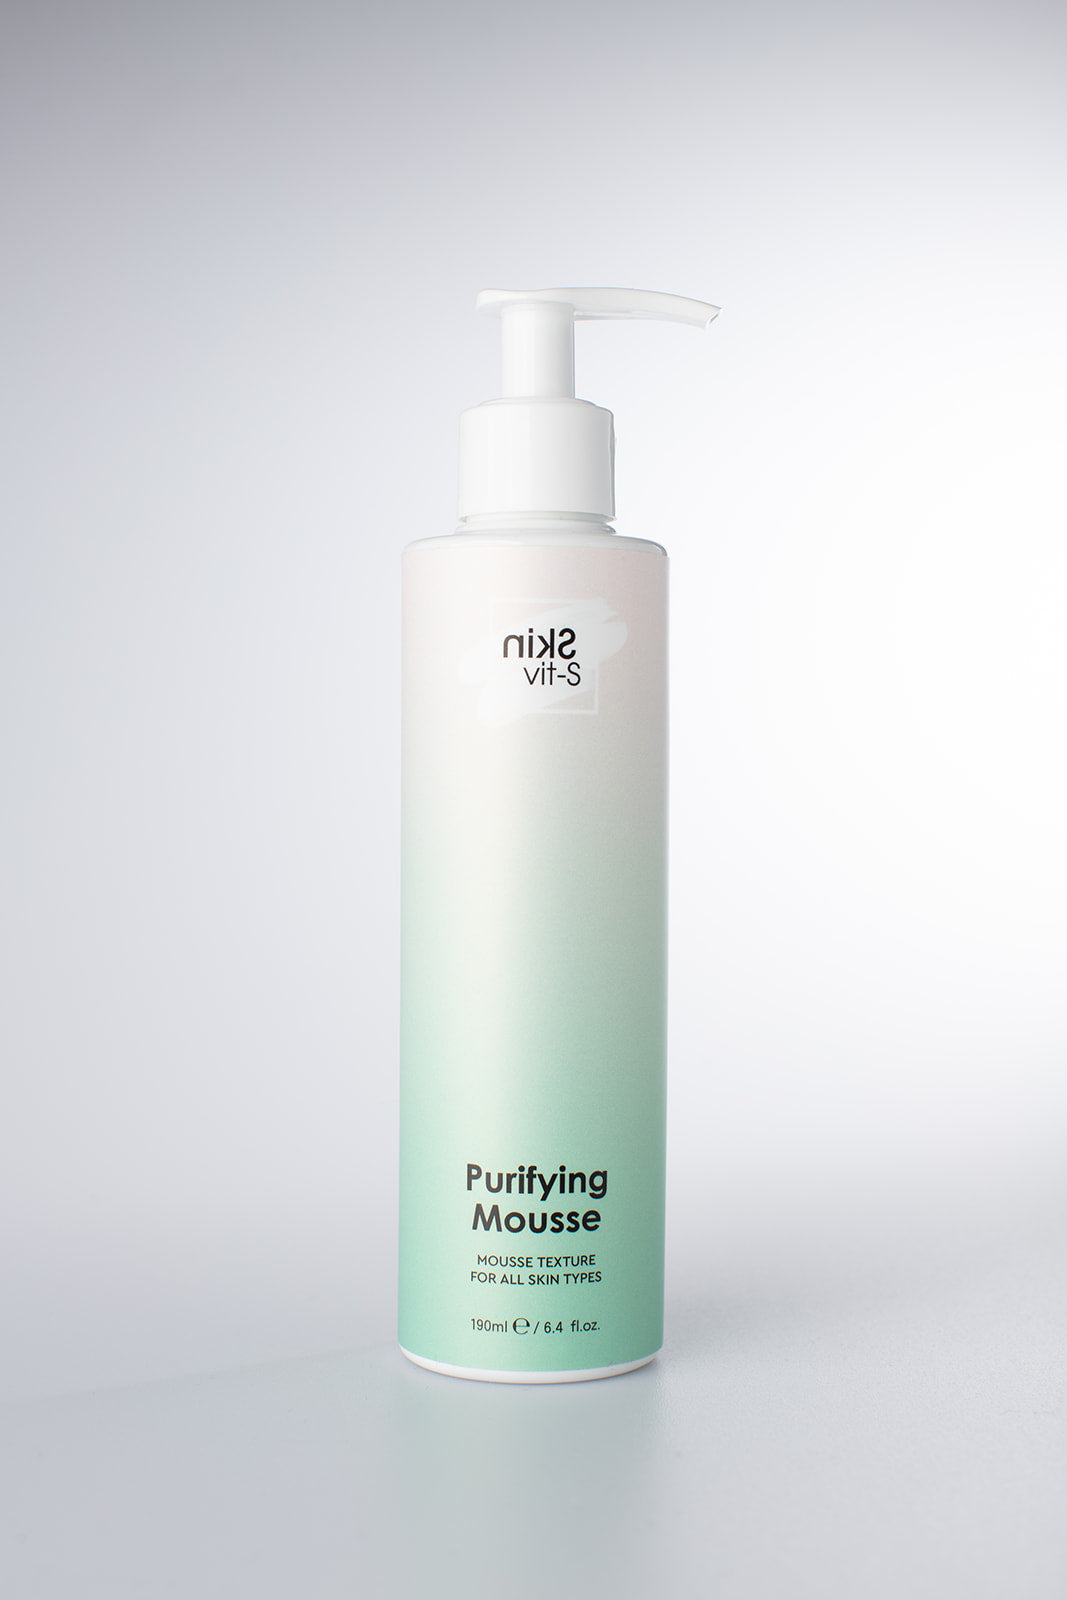 Purifying mousse